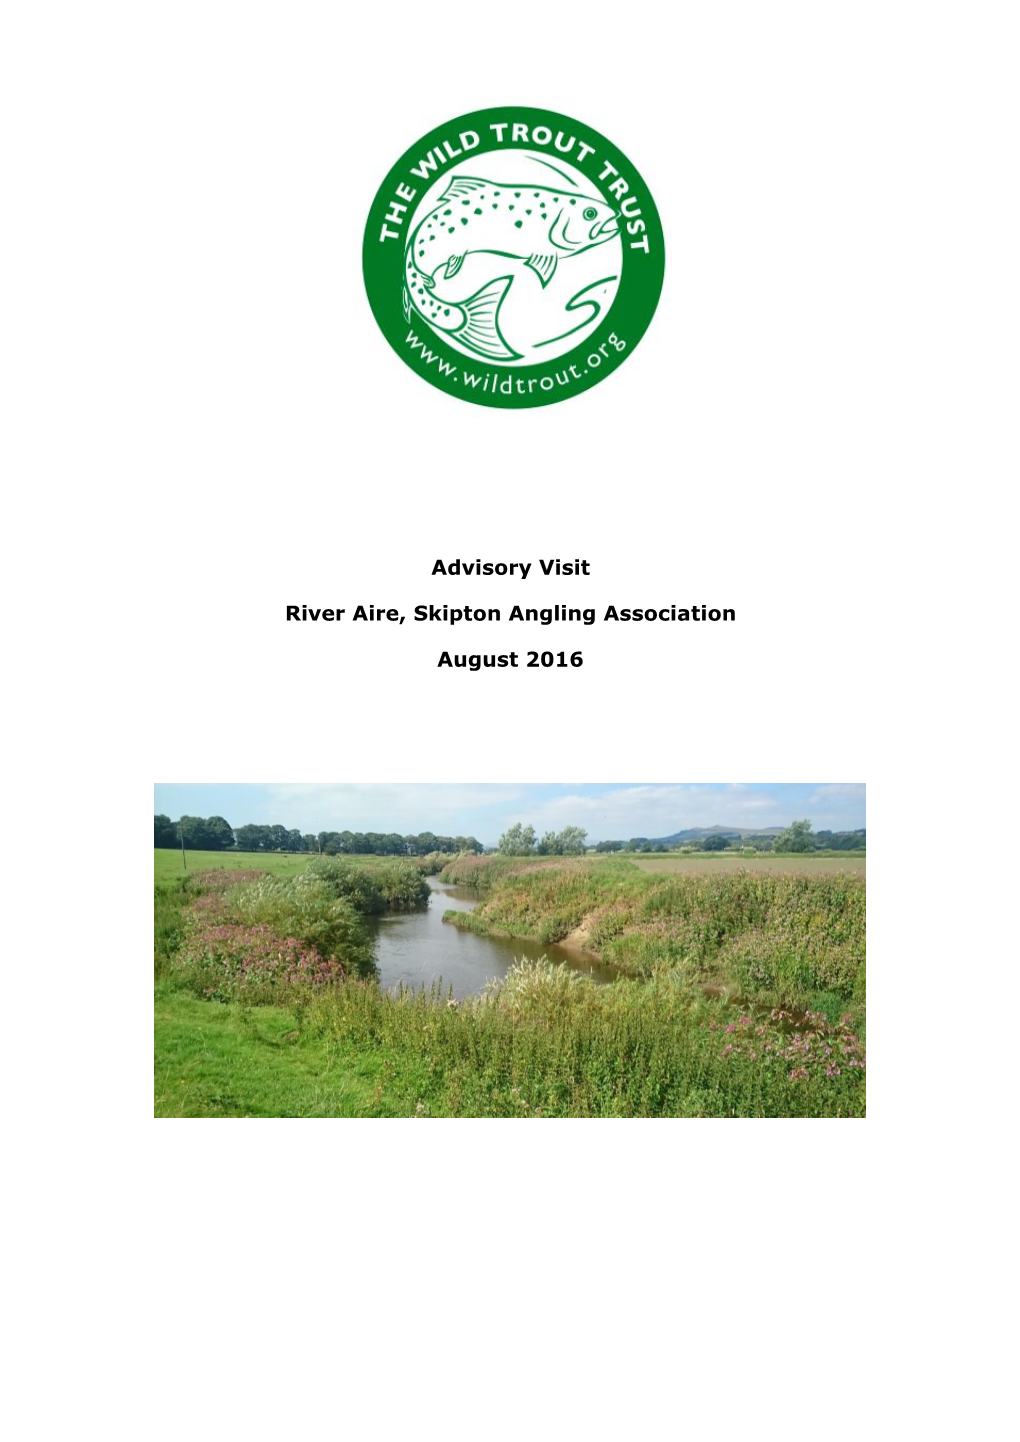 Advisory Visit River Aire, Skipton Angling Association August 2016